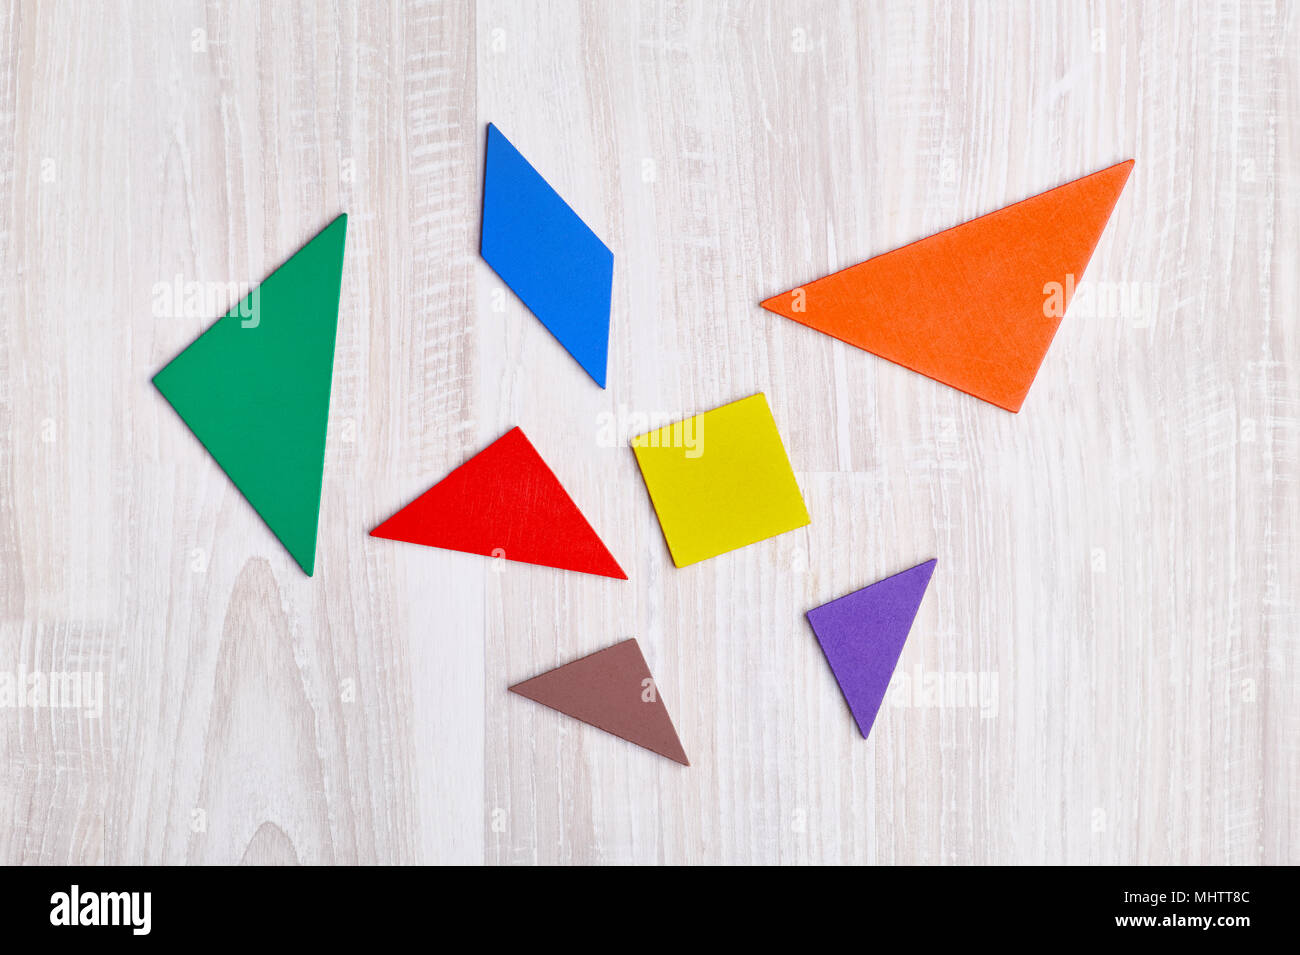 Colored geometric pieces of puzzle like triangles, square and parallelogram, are scattered on a light wooden background Stock Photo